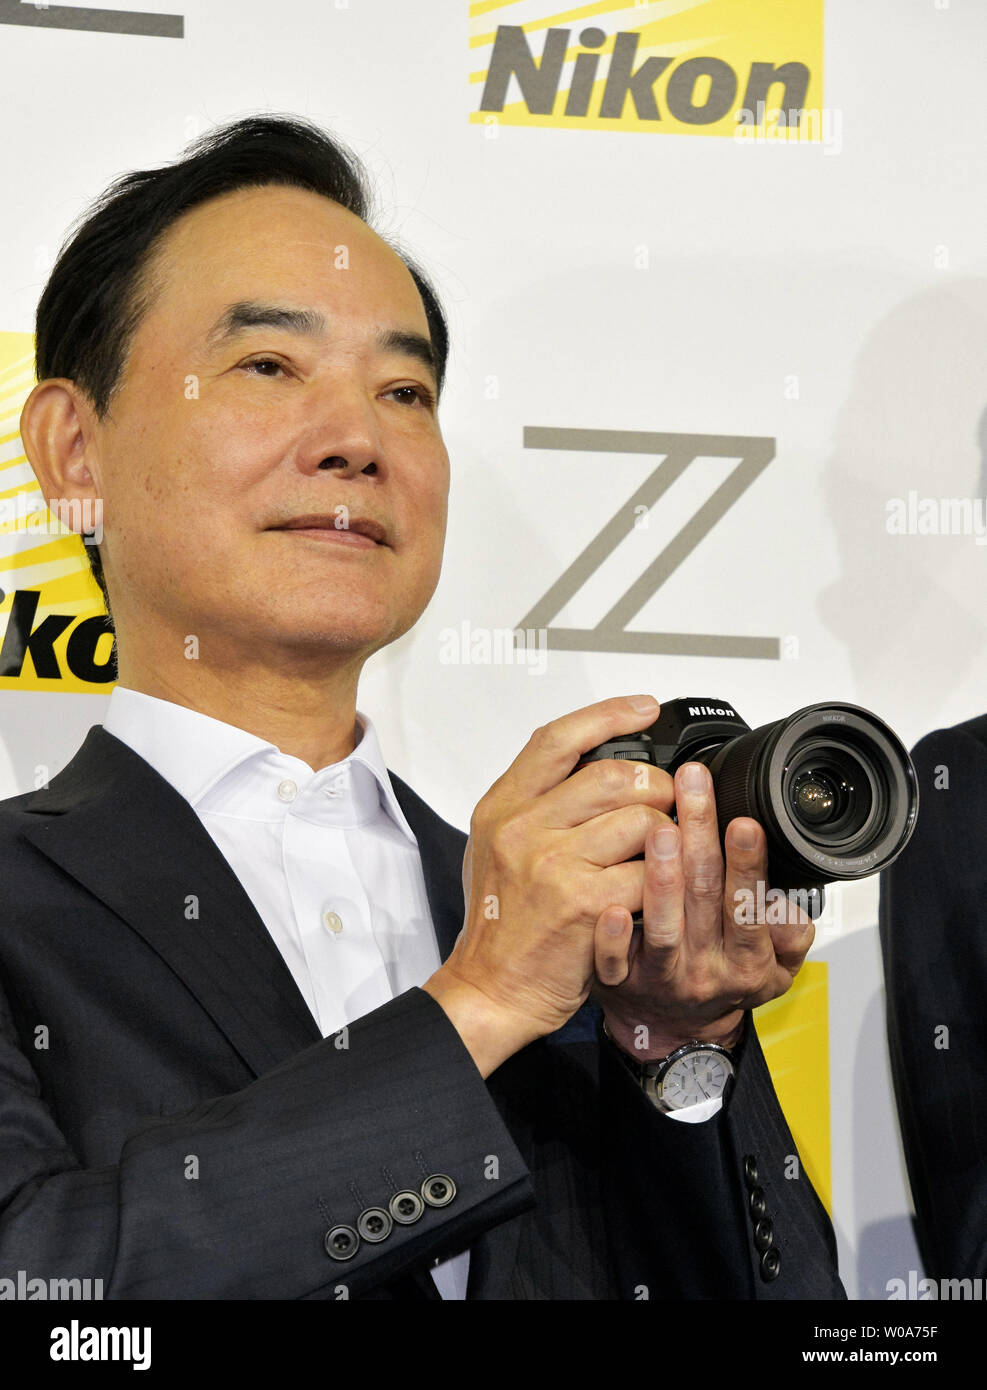 President of NIKON CORPORATION, Kazuo Ushida poses for camera during an  unveiling event for new Z series cameras and lens system in Tokyo, Japan on  August 23, 2018. Photo by Keizo Mori/UPI